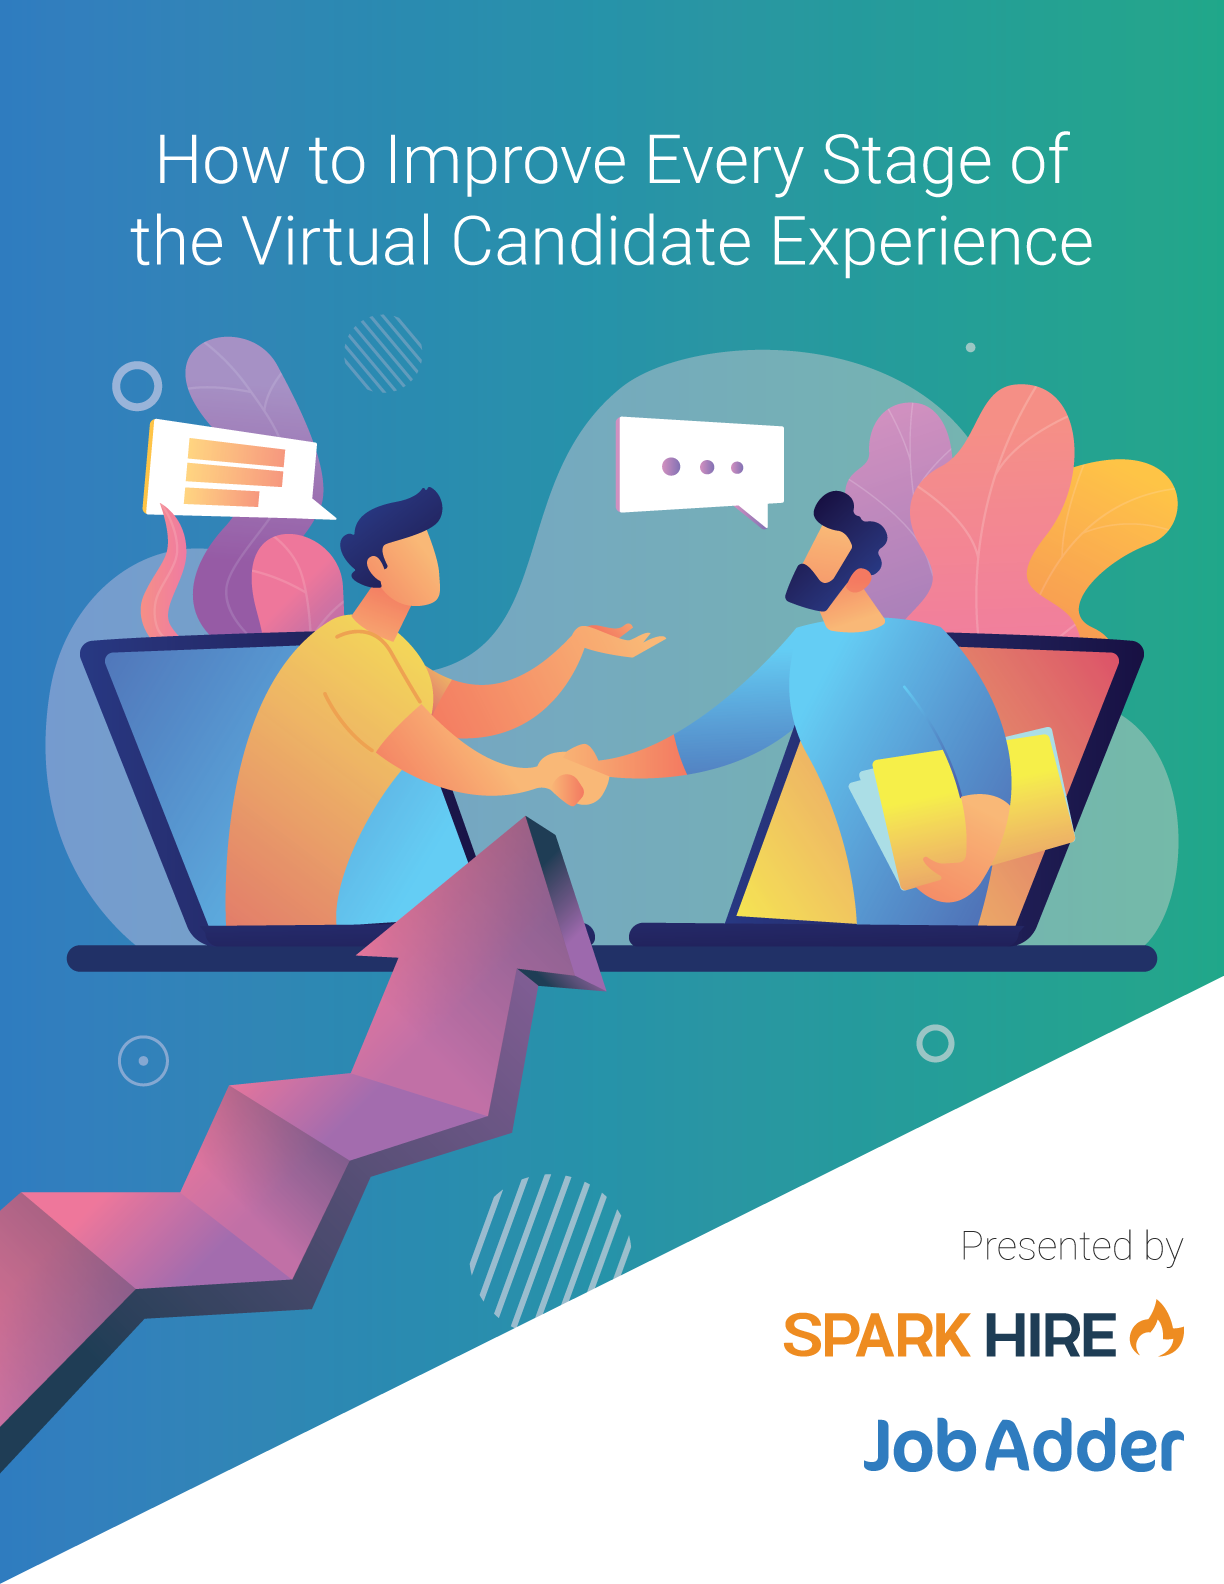 How to Improve Every Stage of the Virtual Candidate Experience